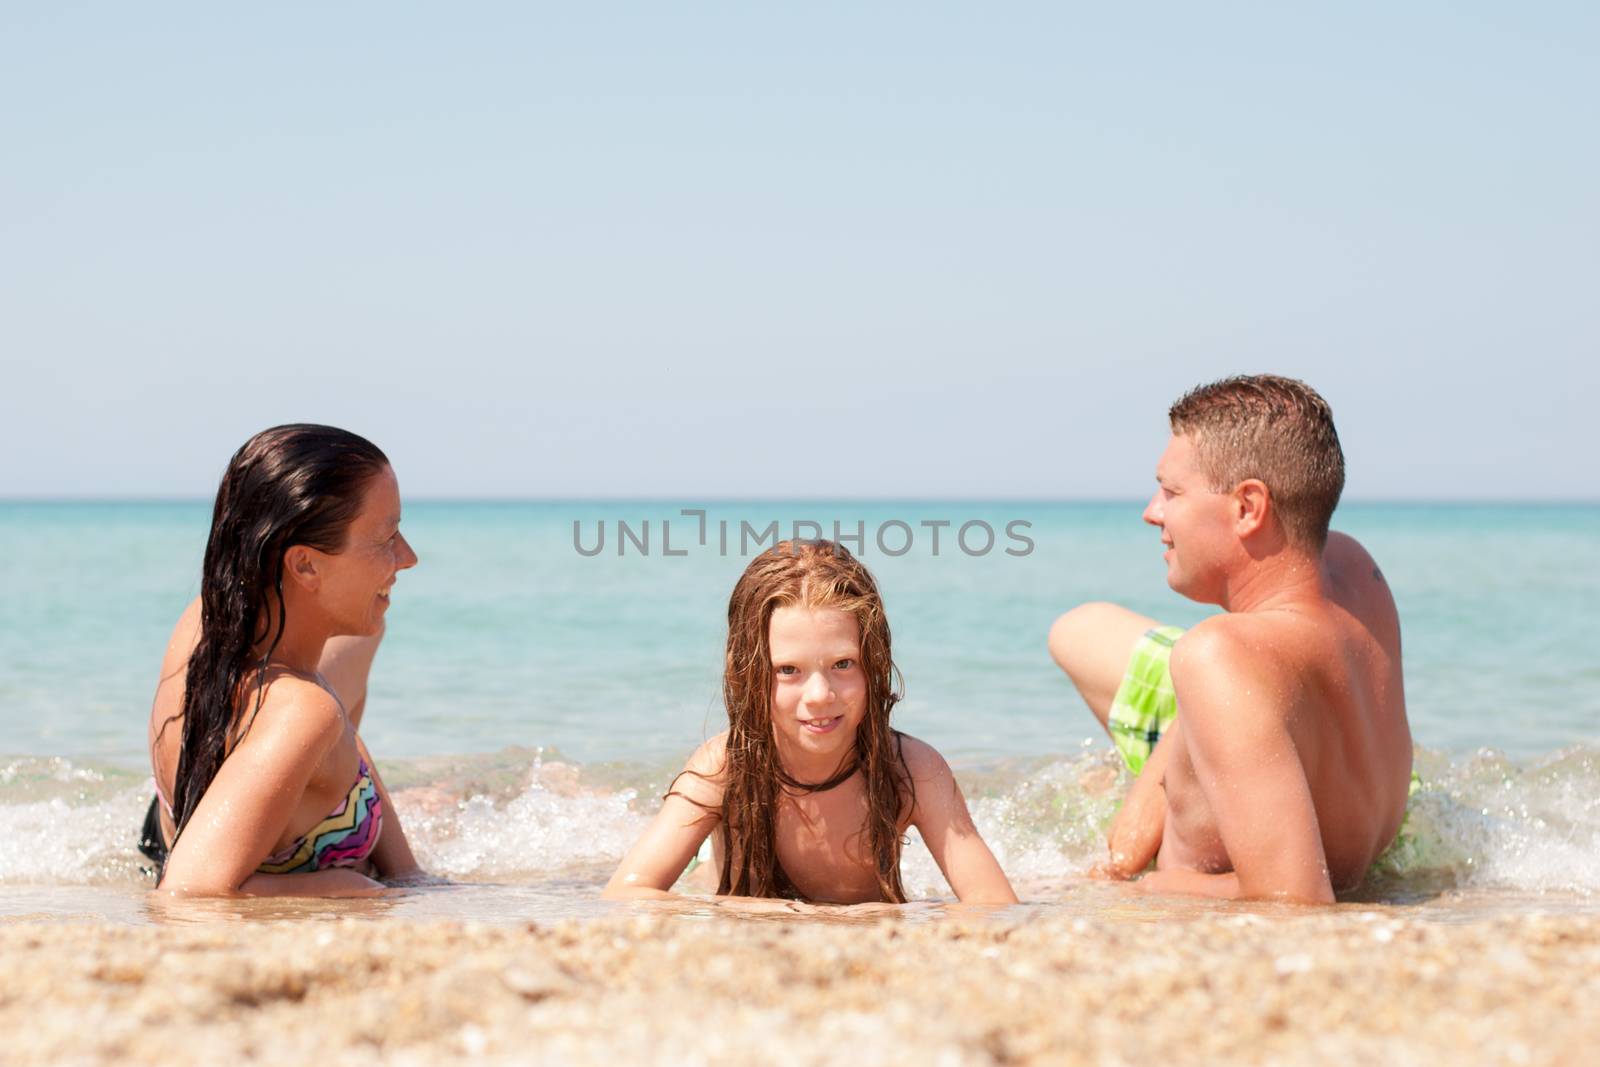 Family of three relaxing at beach